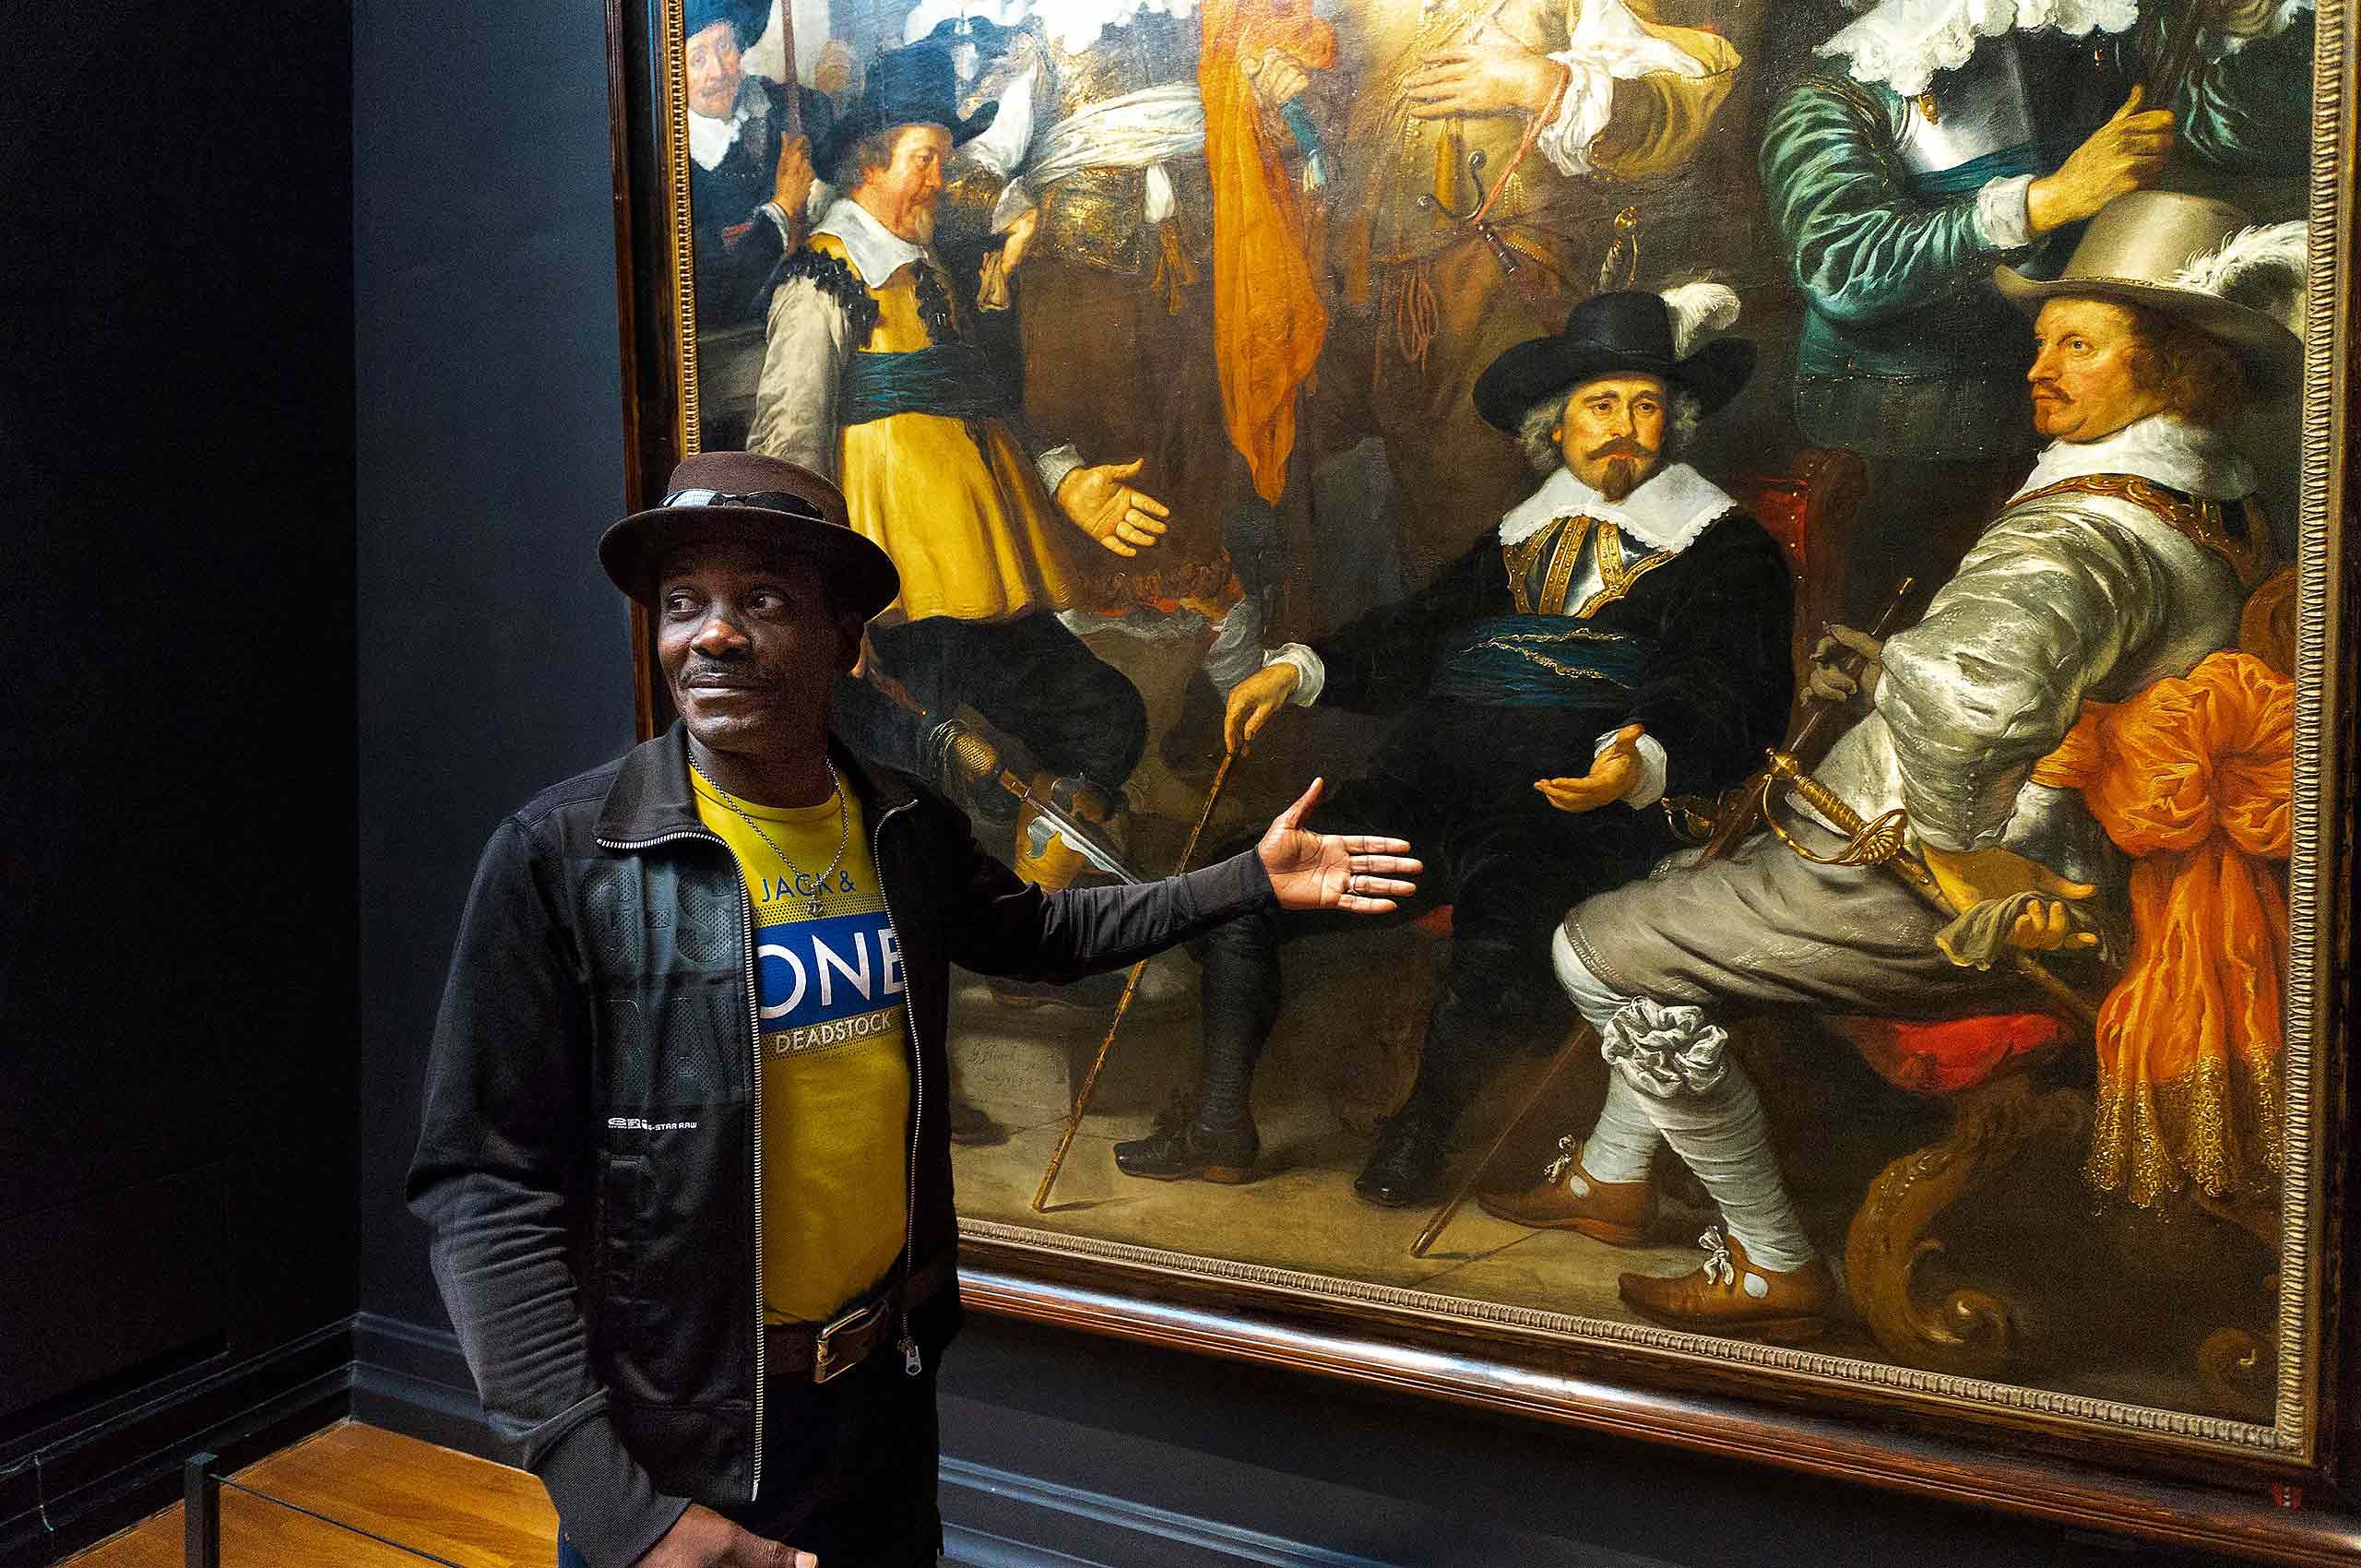 man mimicking a painting at the  Rijksmuseum,cAmsterdamcNetherlands.  rembrandt